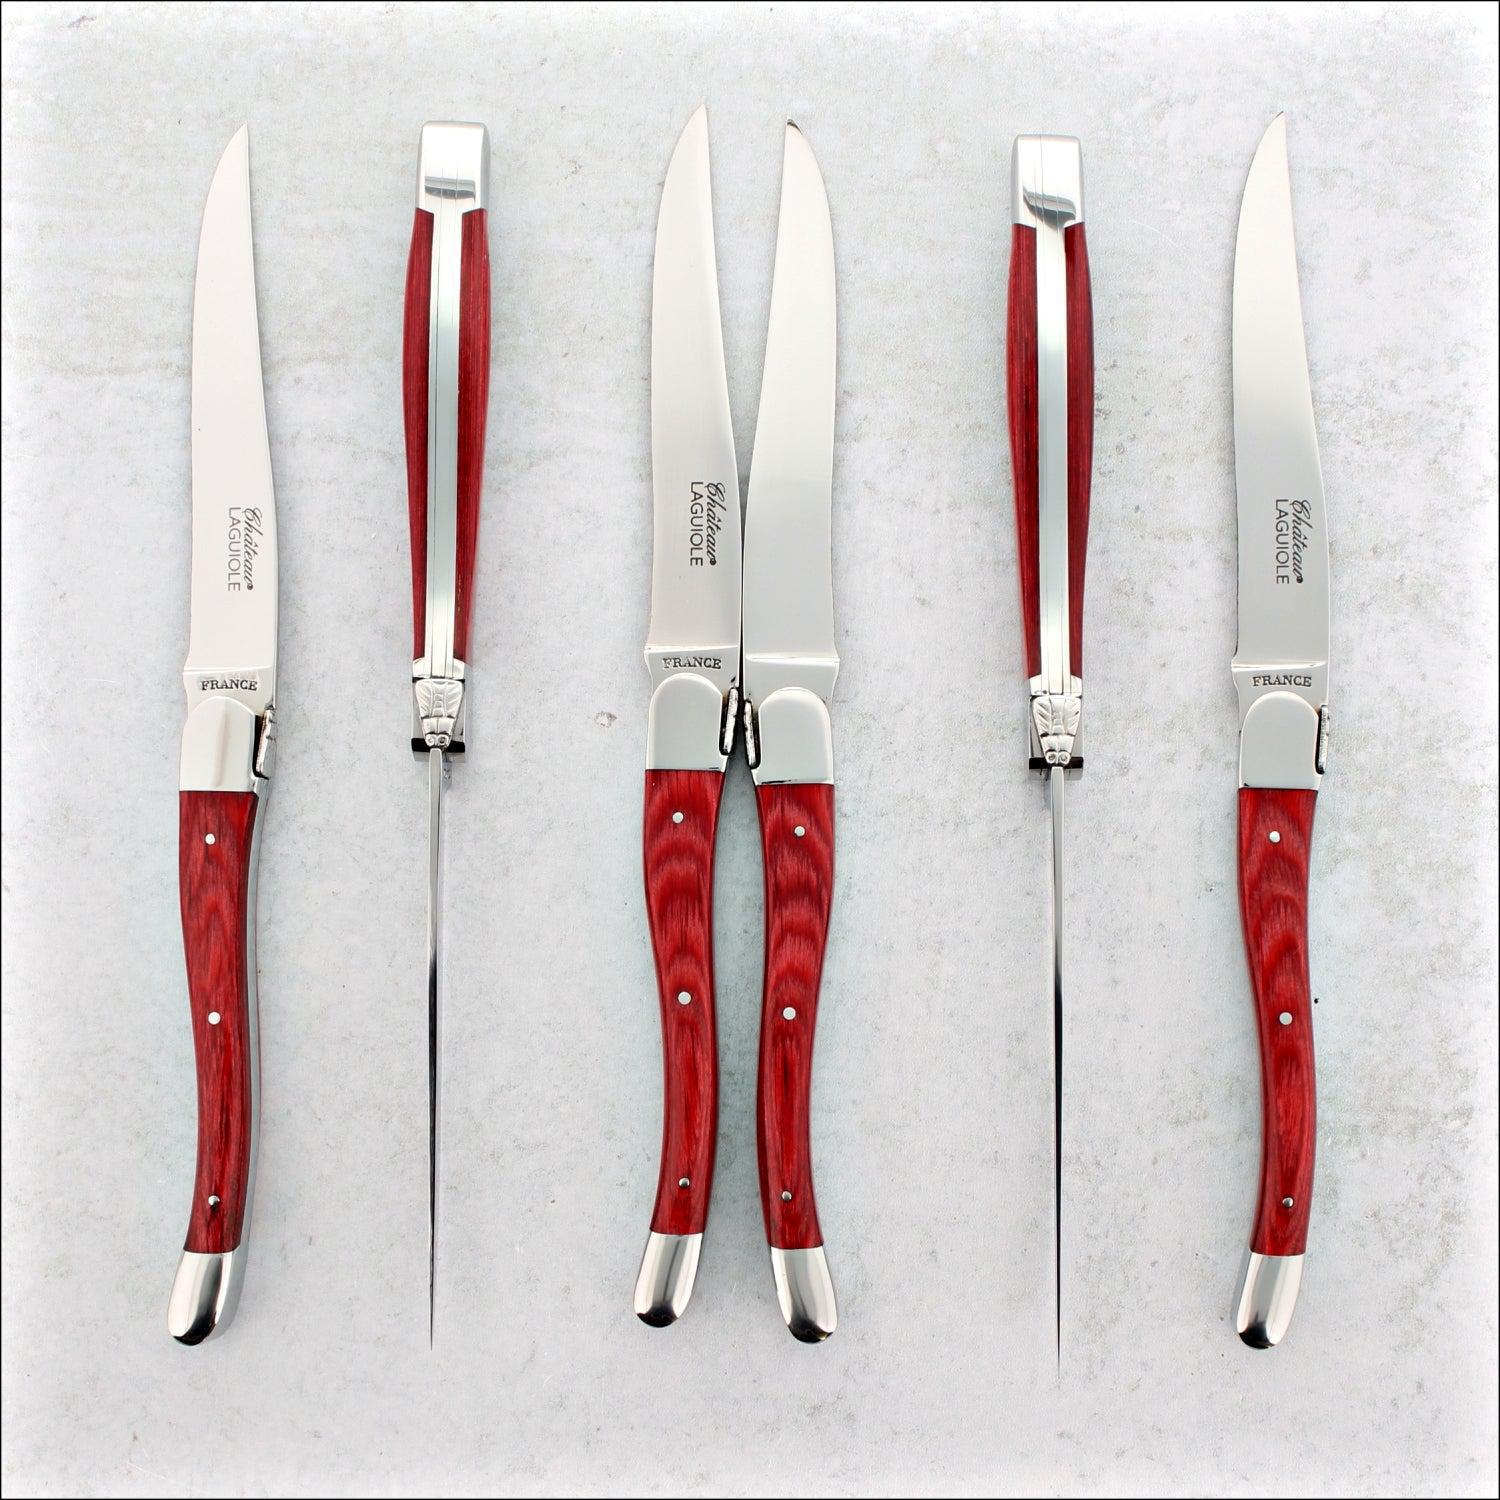 https://www.laguiole-imports.com/cdn/shop/files/Chateau-Laguiole-Signature-Steak-Knives-Red-Stamina-Wood-Shiny-Finish-Chateau-Laguioler-Made-in-France-2.jpg?v=1704105104